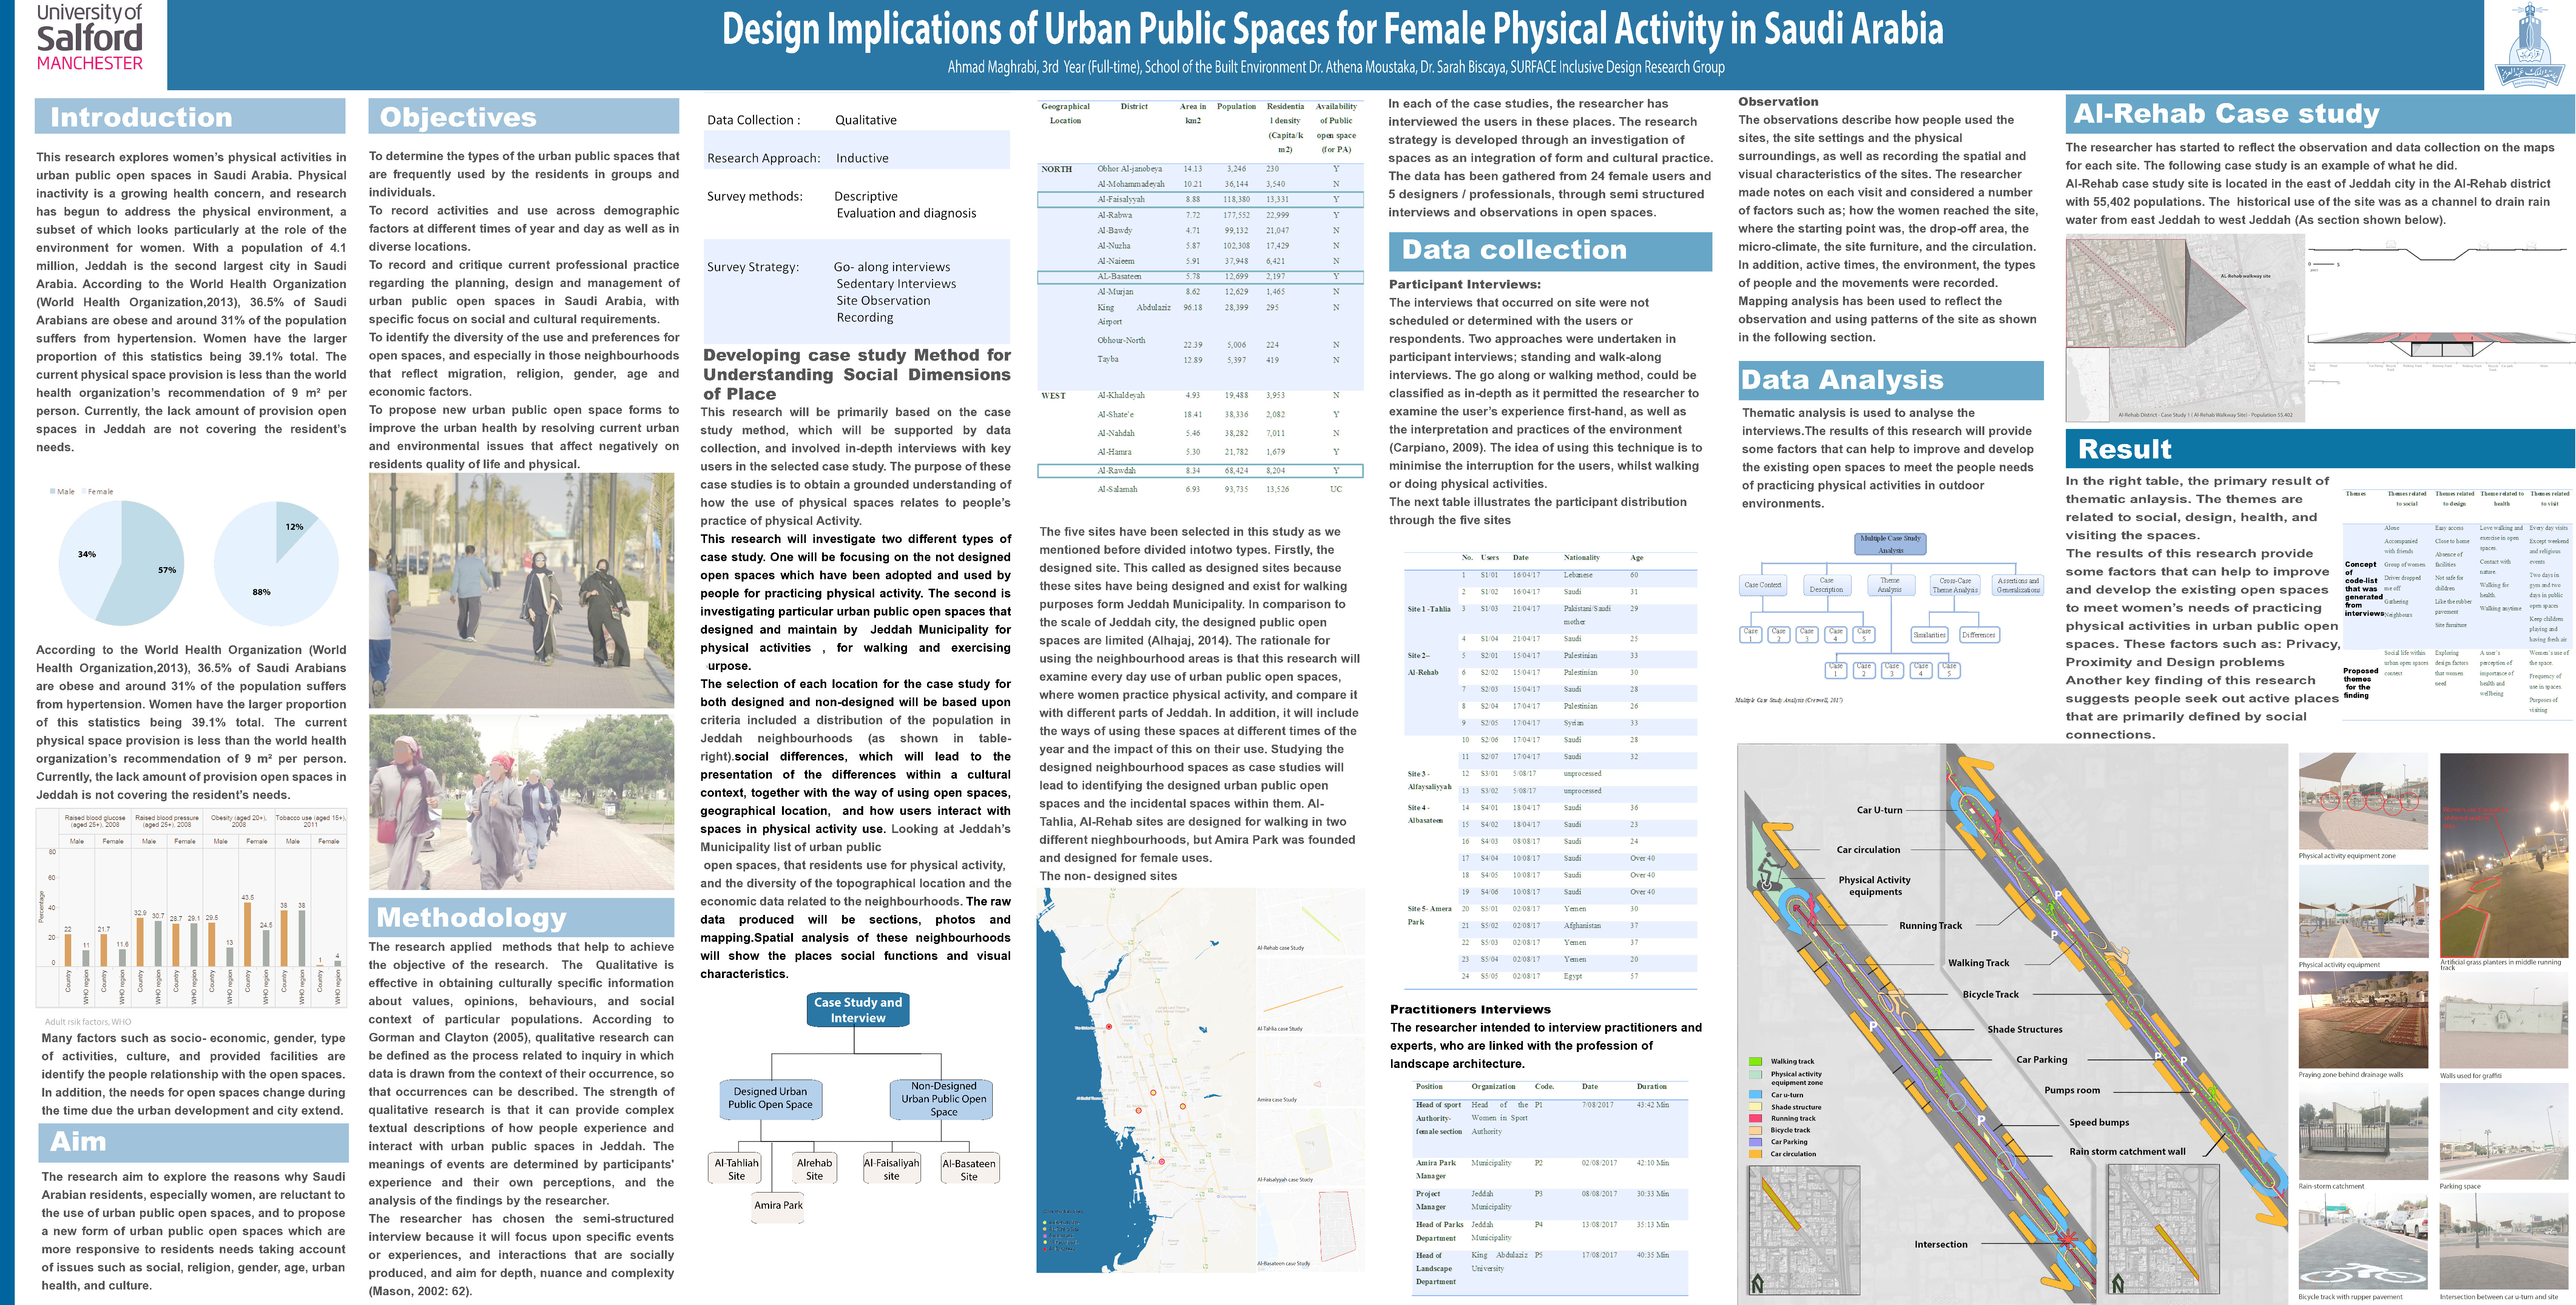 Design implications of urban public spaces for female physical activity in Saudi Arabia Thumbnail